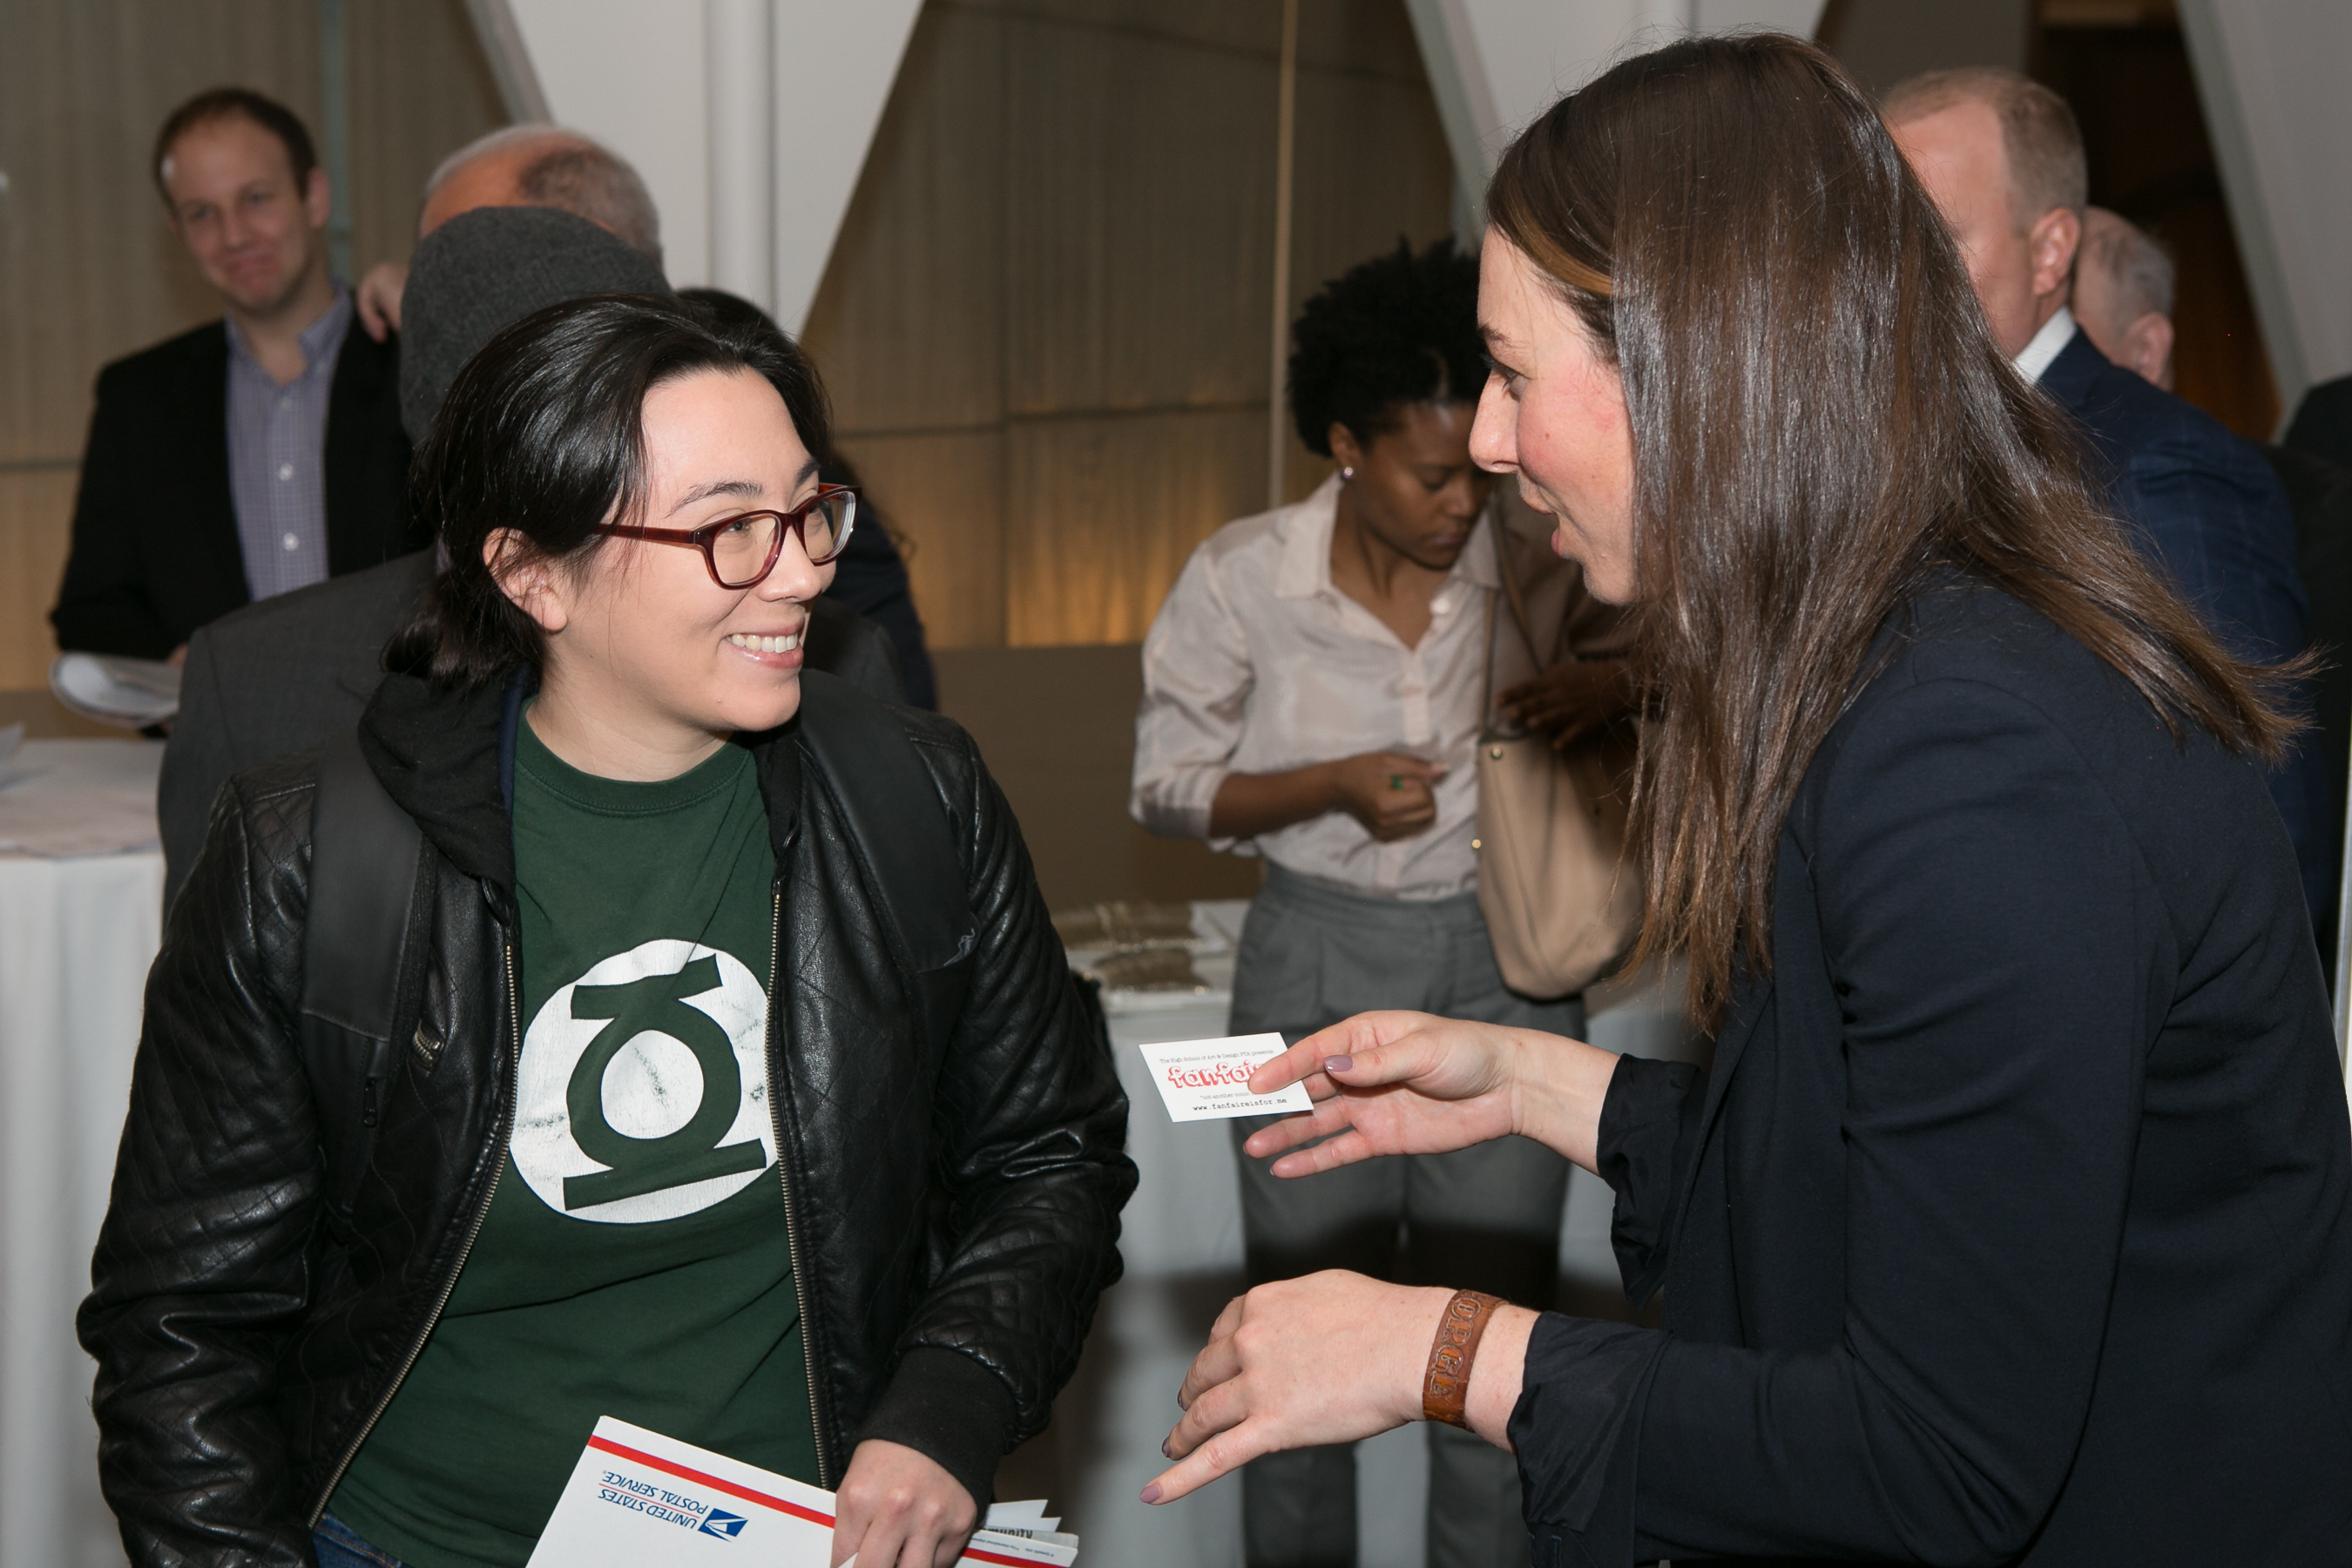 Two people talking at a networking event and exchanging business cards